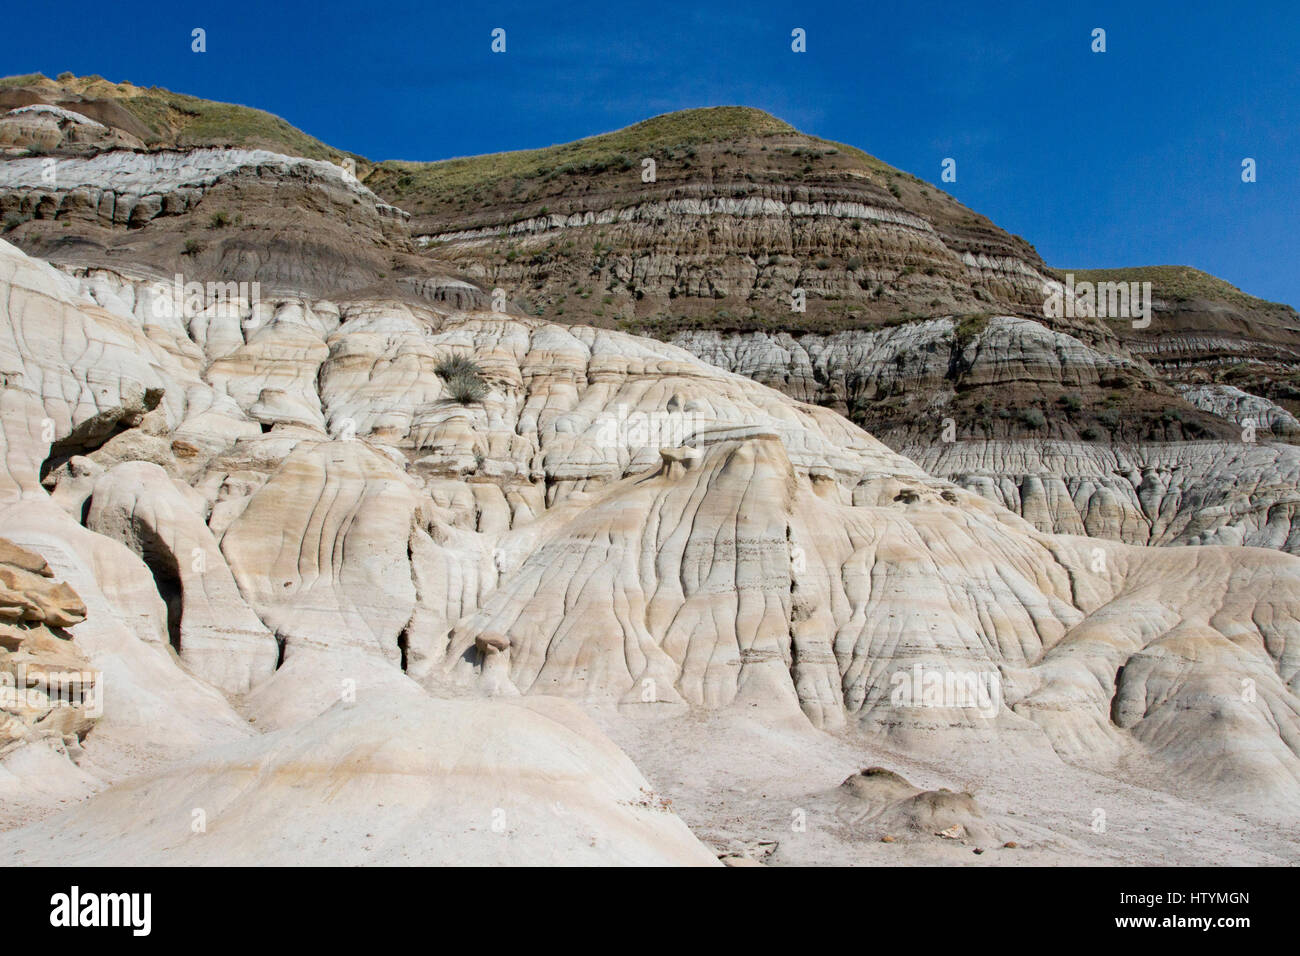 Geological formations created by erosion, in the Badlands near Drumheller, Alberta, Canada. Stock Photo